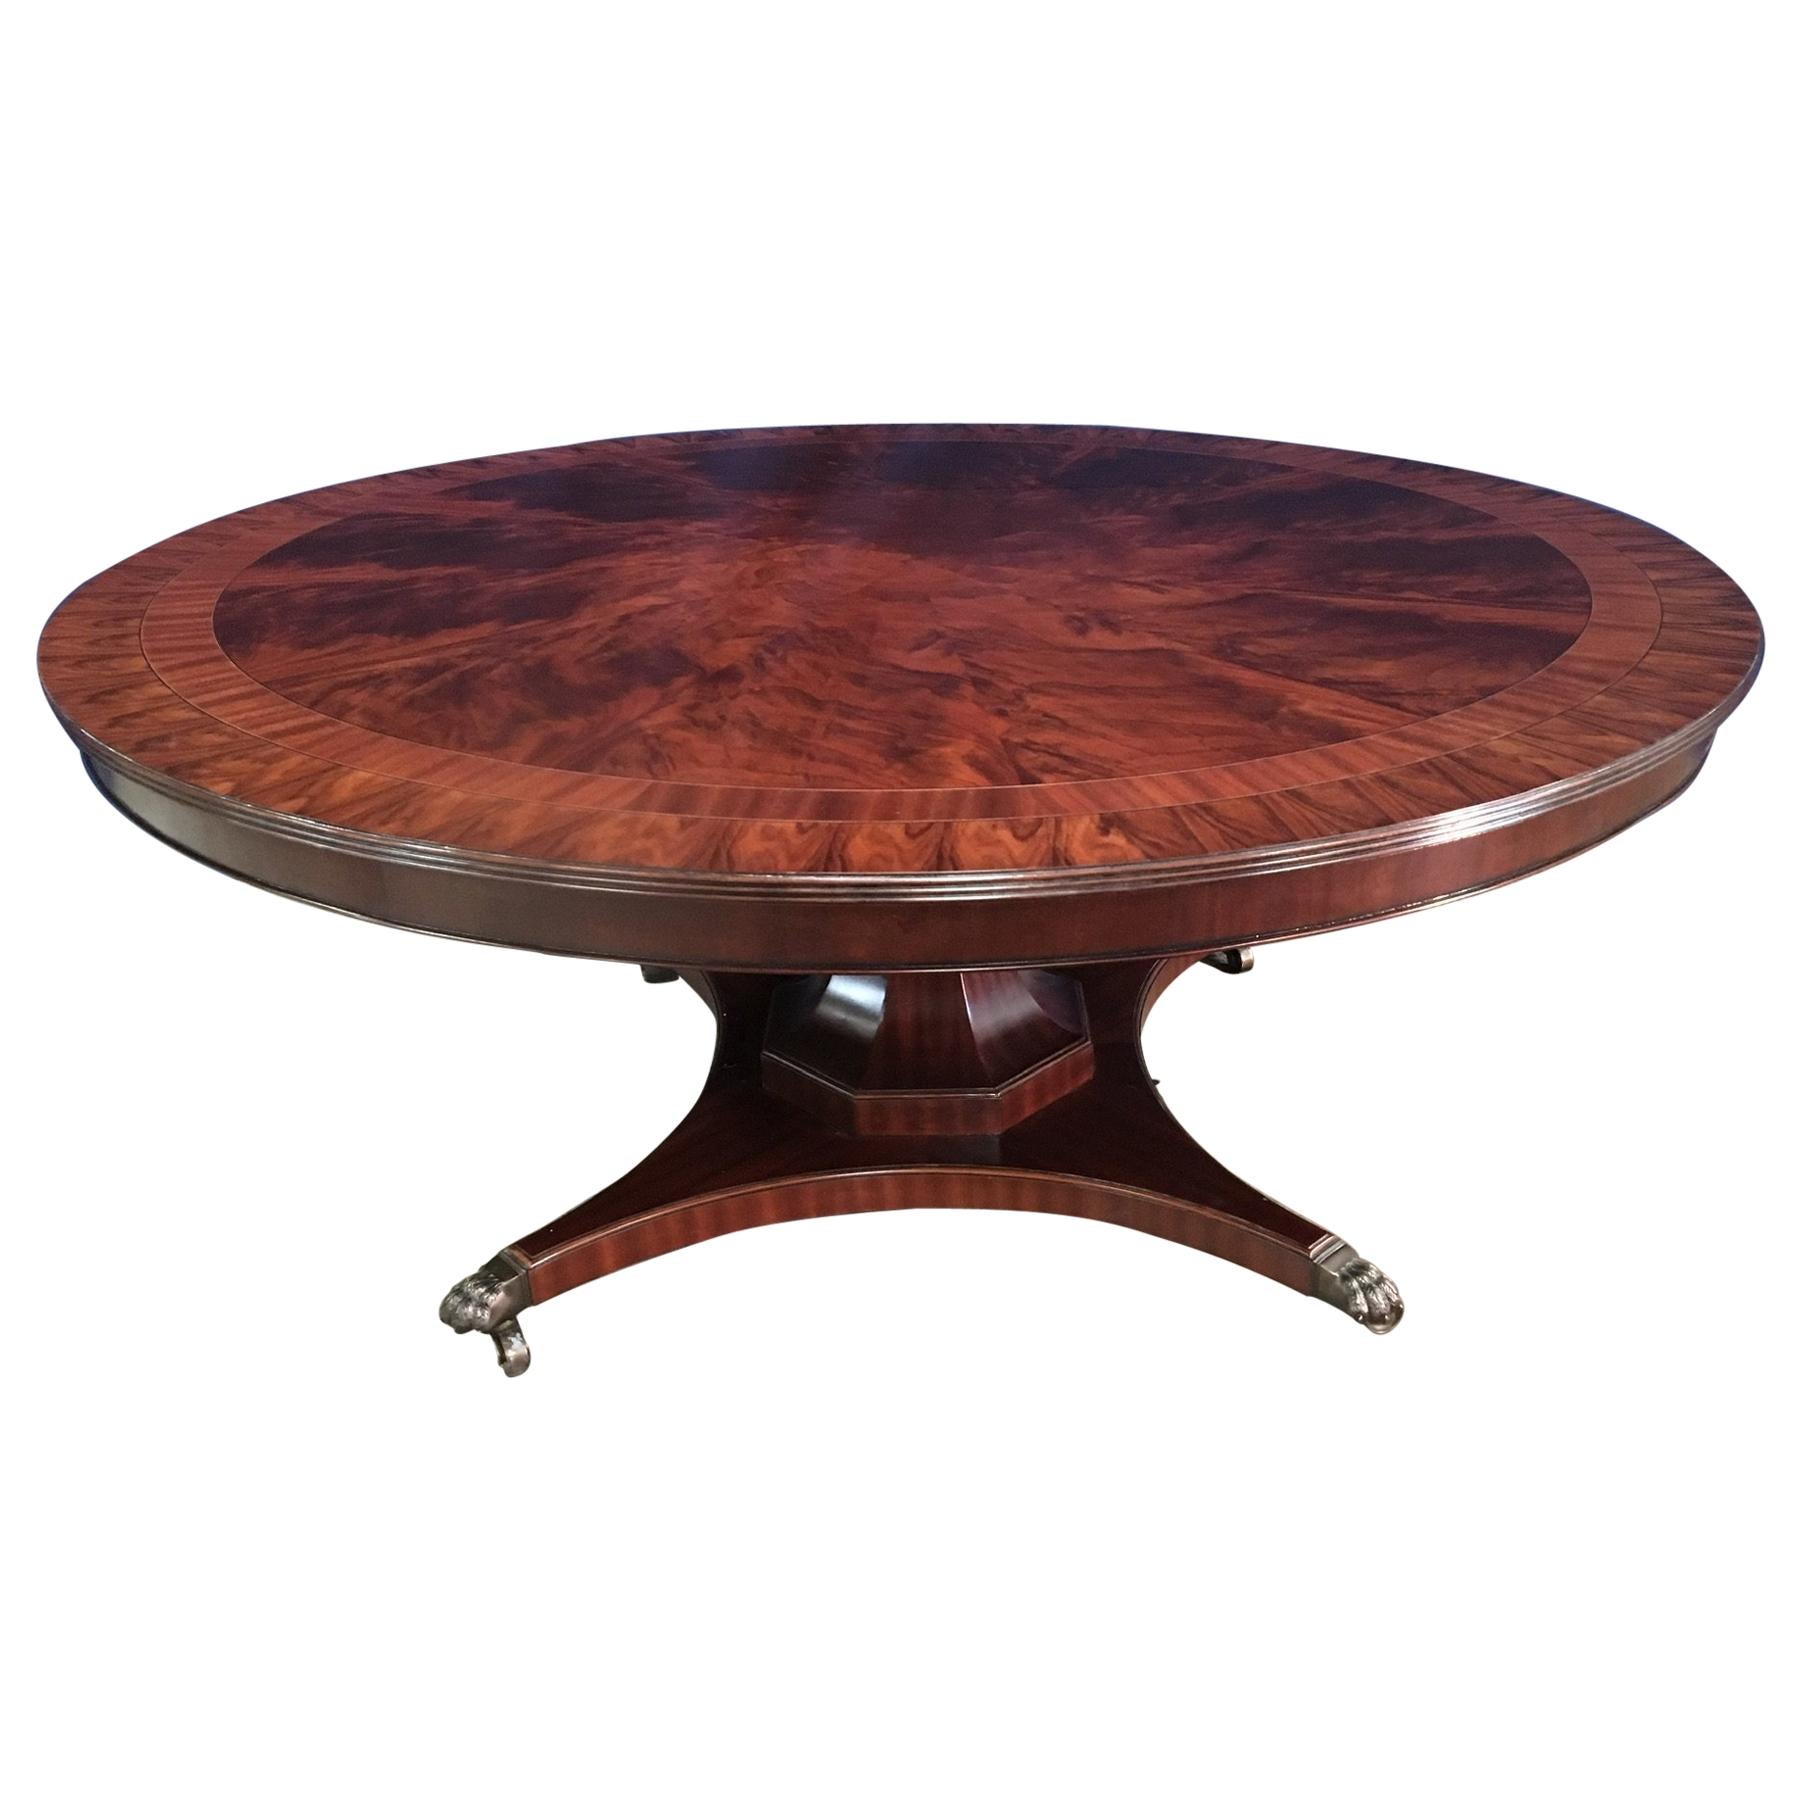 Custom Round Mahogany Transitional Dining Table by Leighton Hall